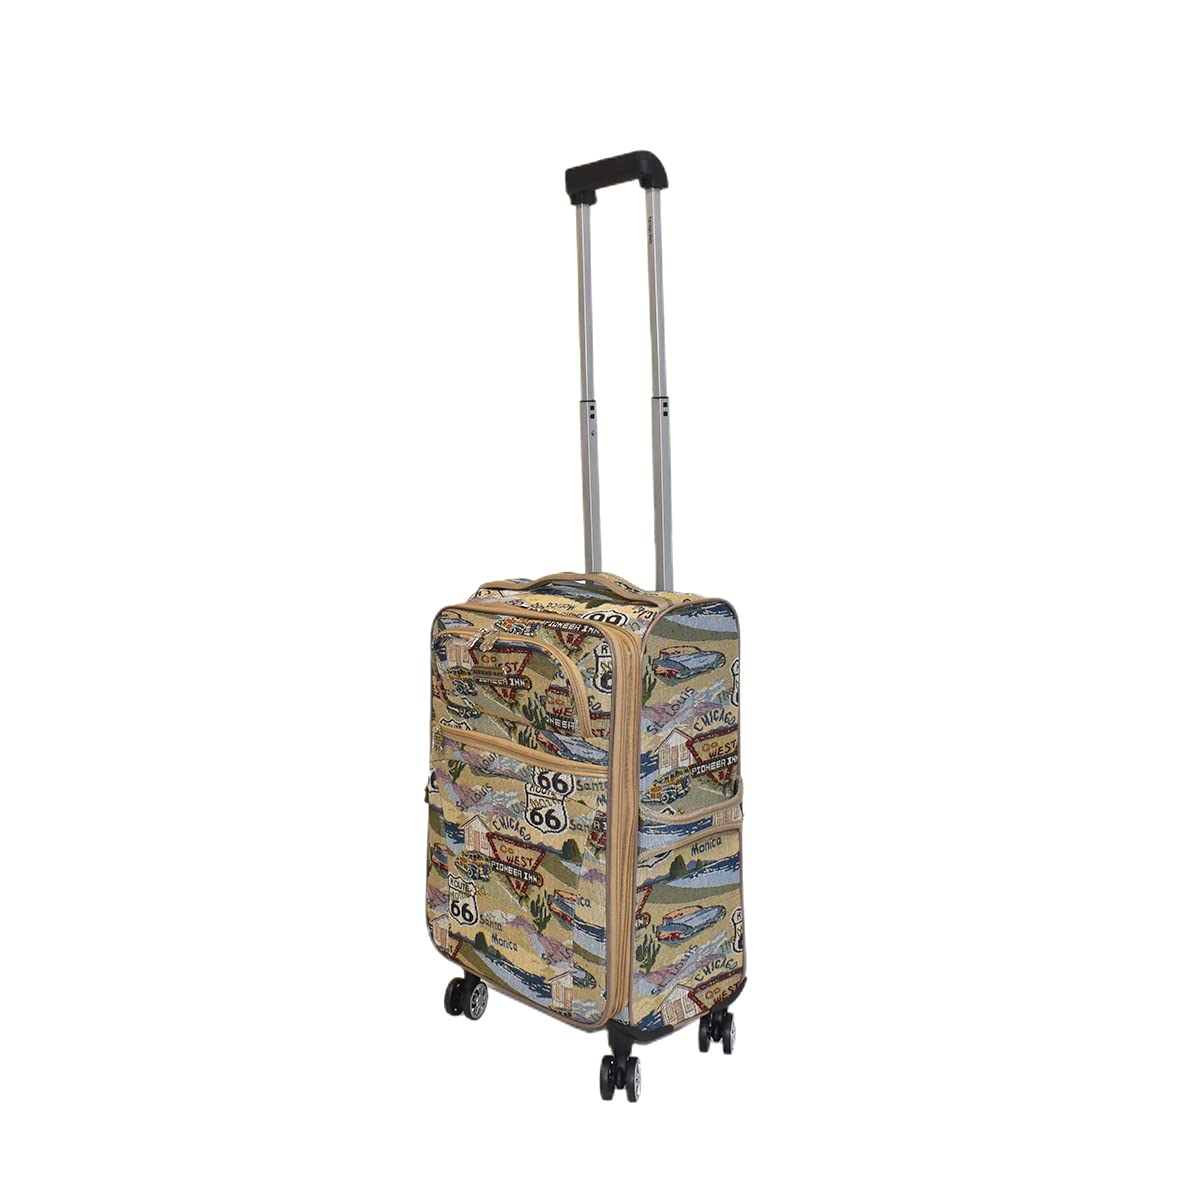 Karriage-Mate carry On Luggage, Expandable, Spinner Wheels, Lightweight, Route 66 Theme (01413B7)